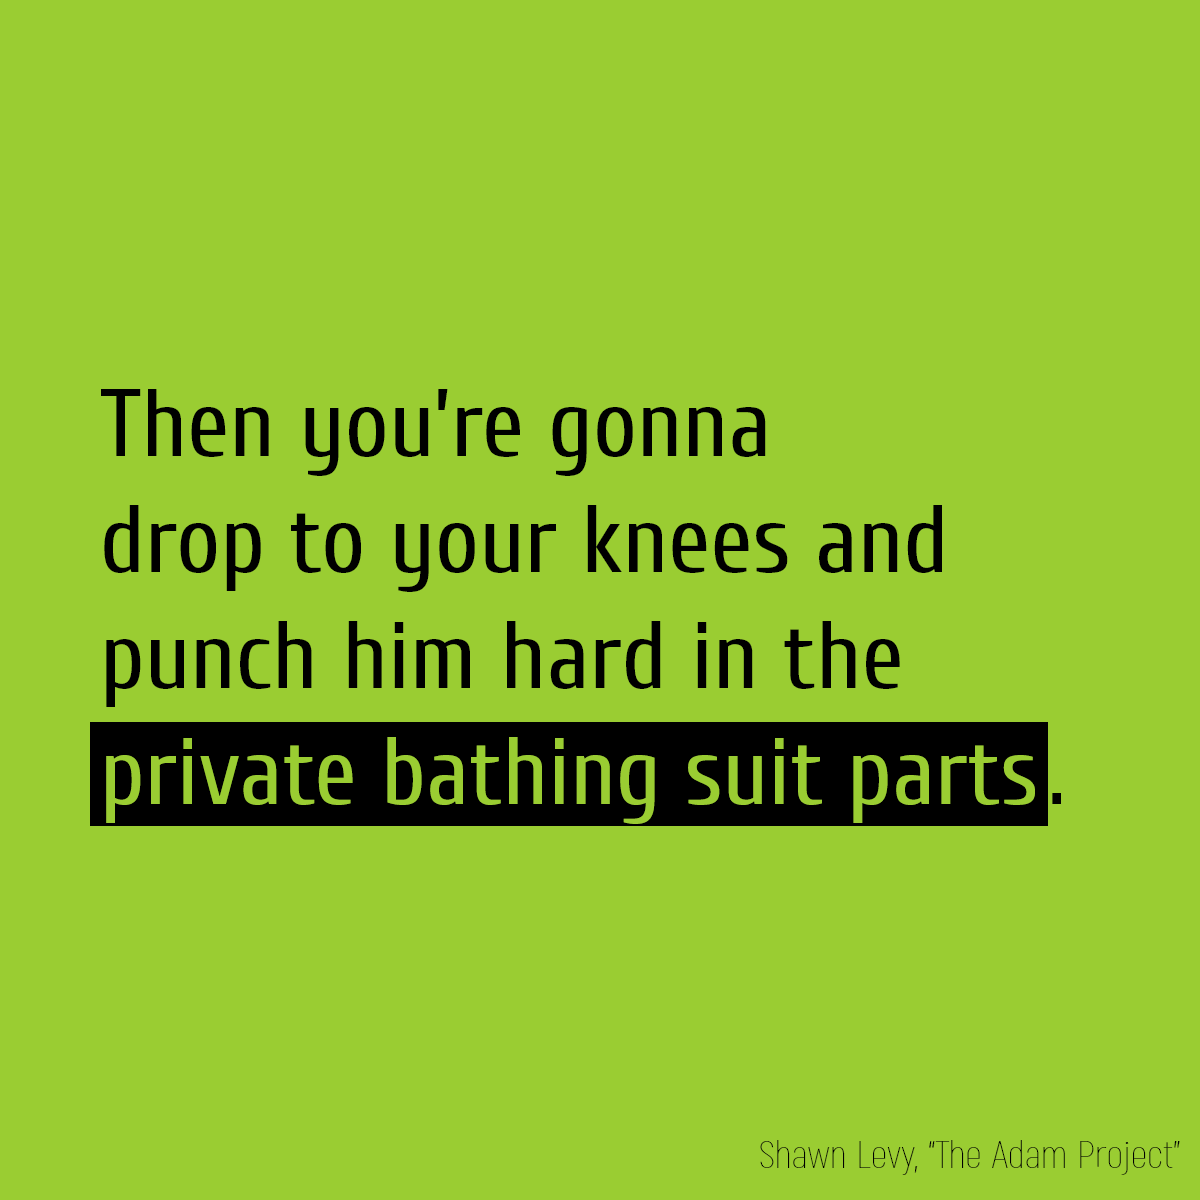 Then you’re gonna drop to your knees and punch him hard in the **private bathing suit parts**.